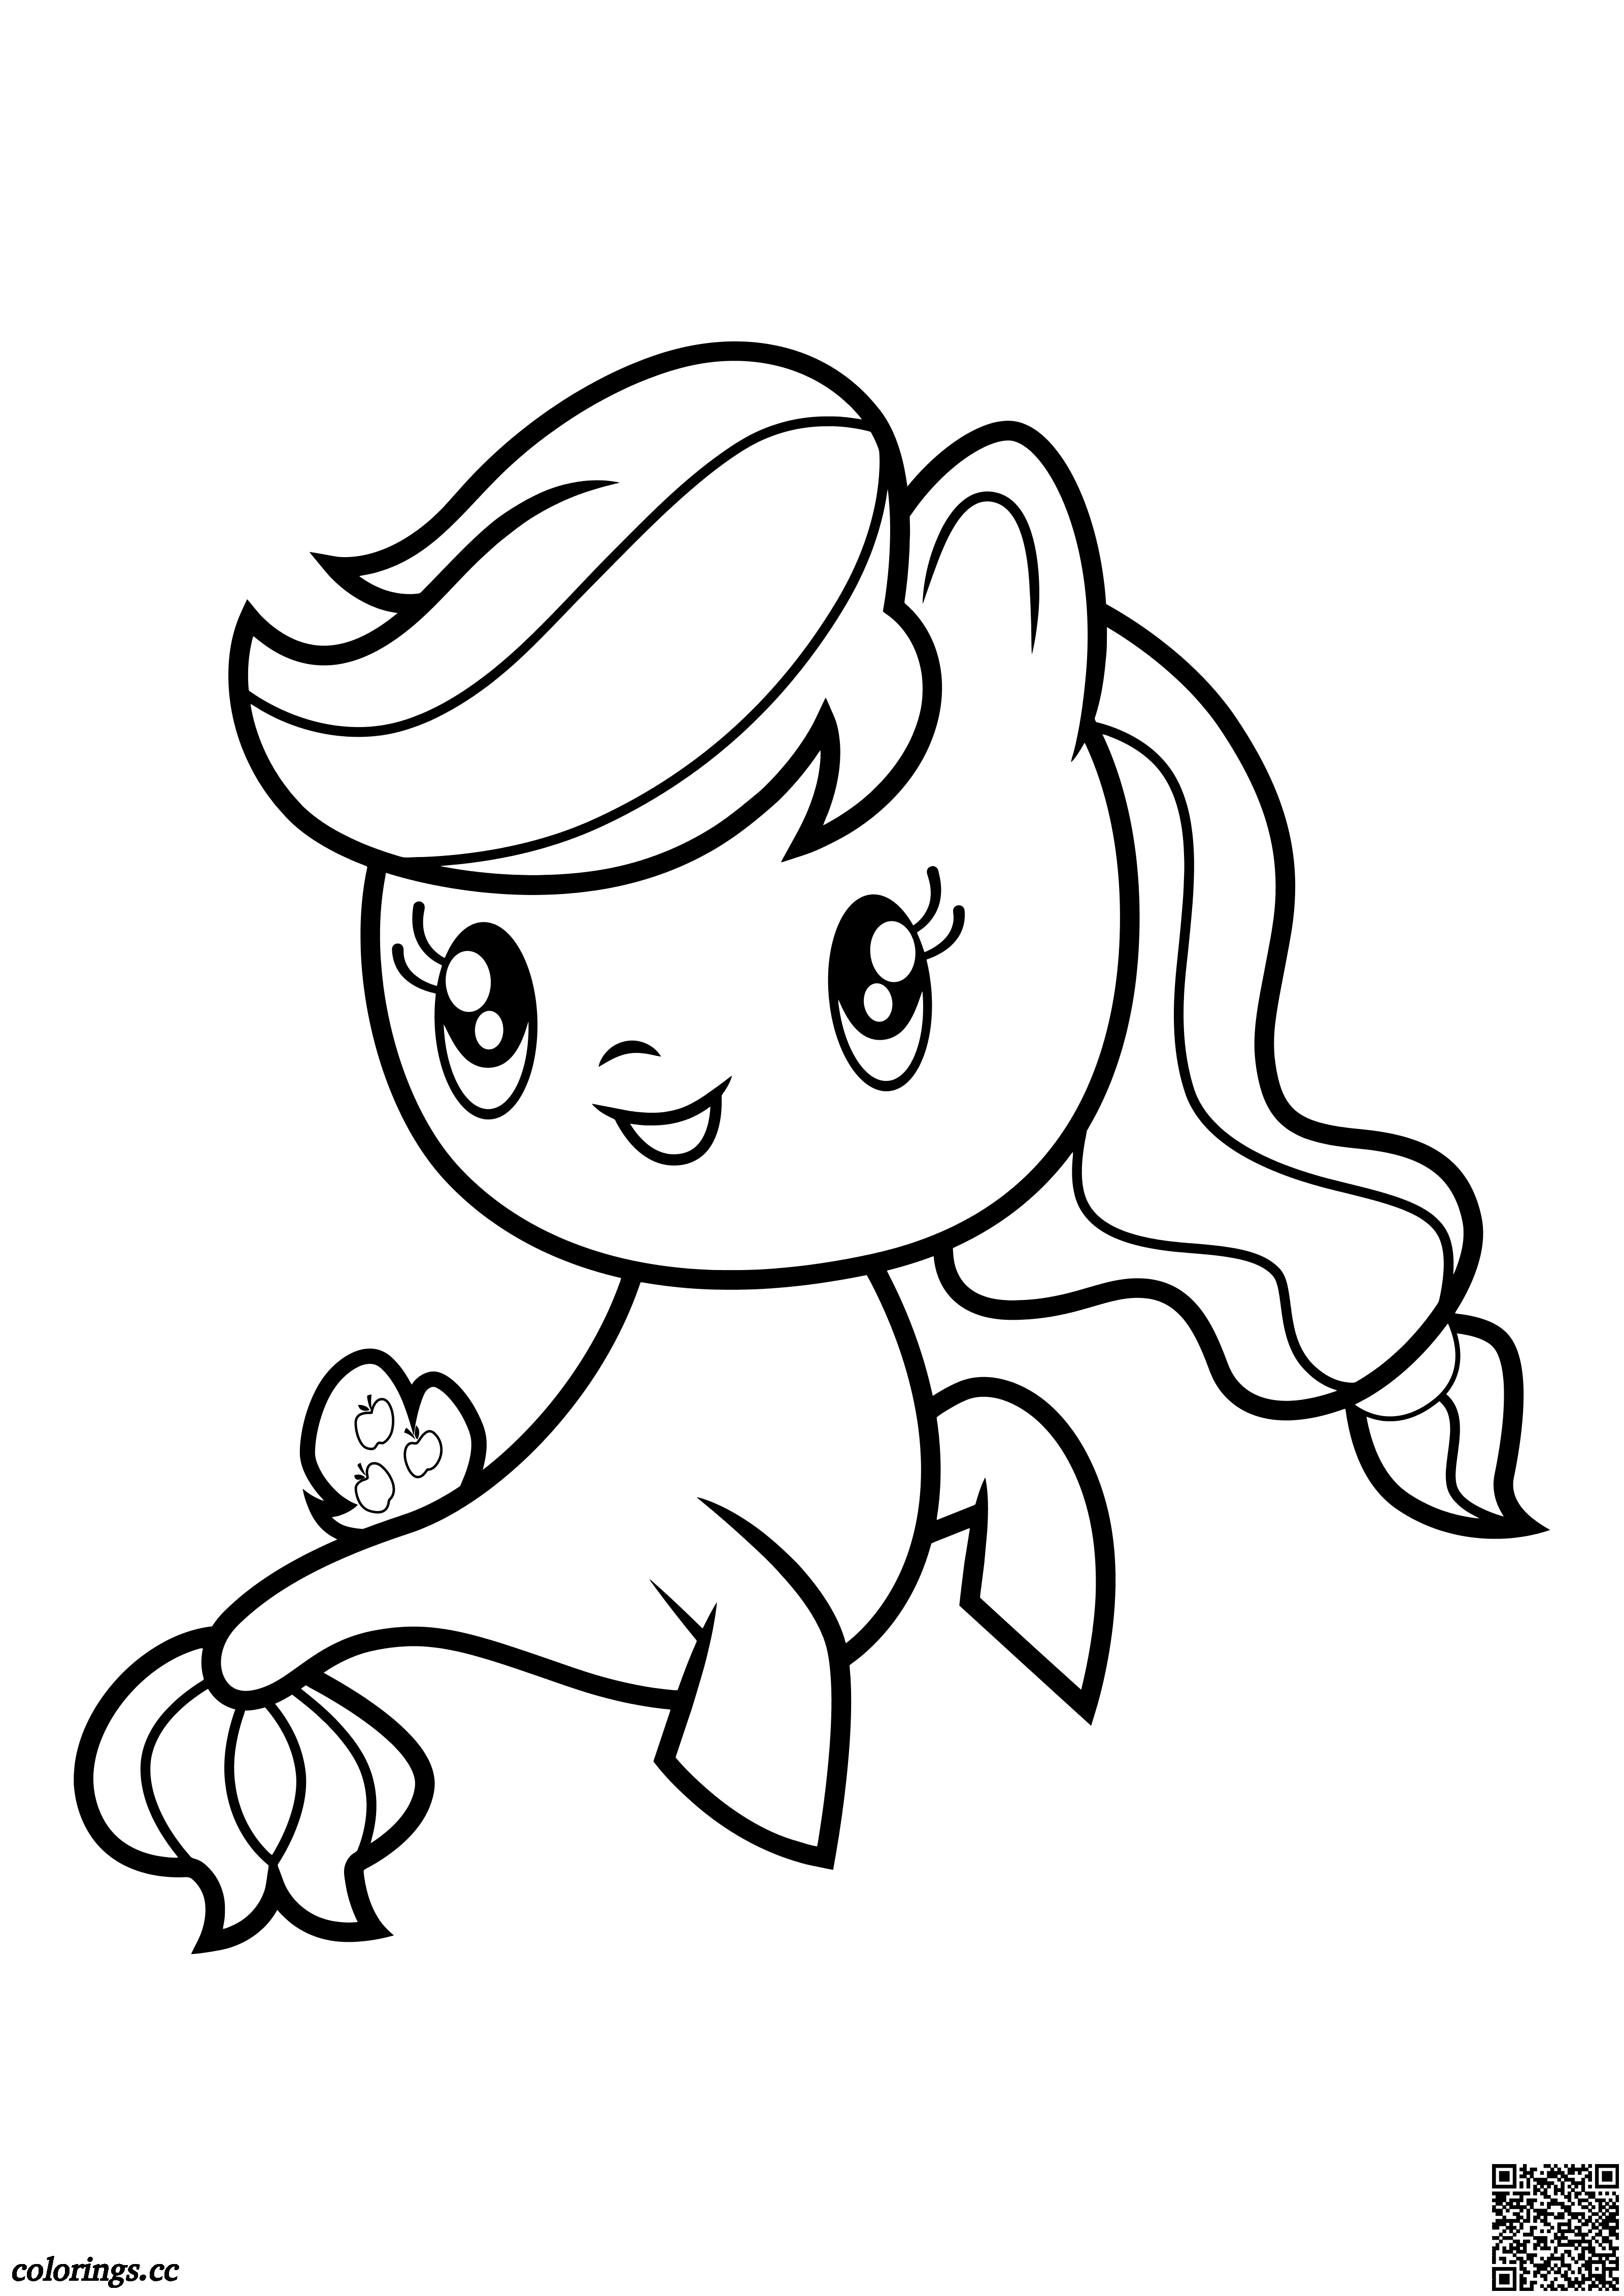 Sea little pony Applejack coloring pages, My little pony coloring ...